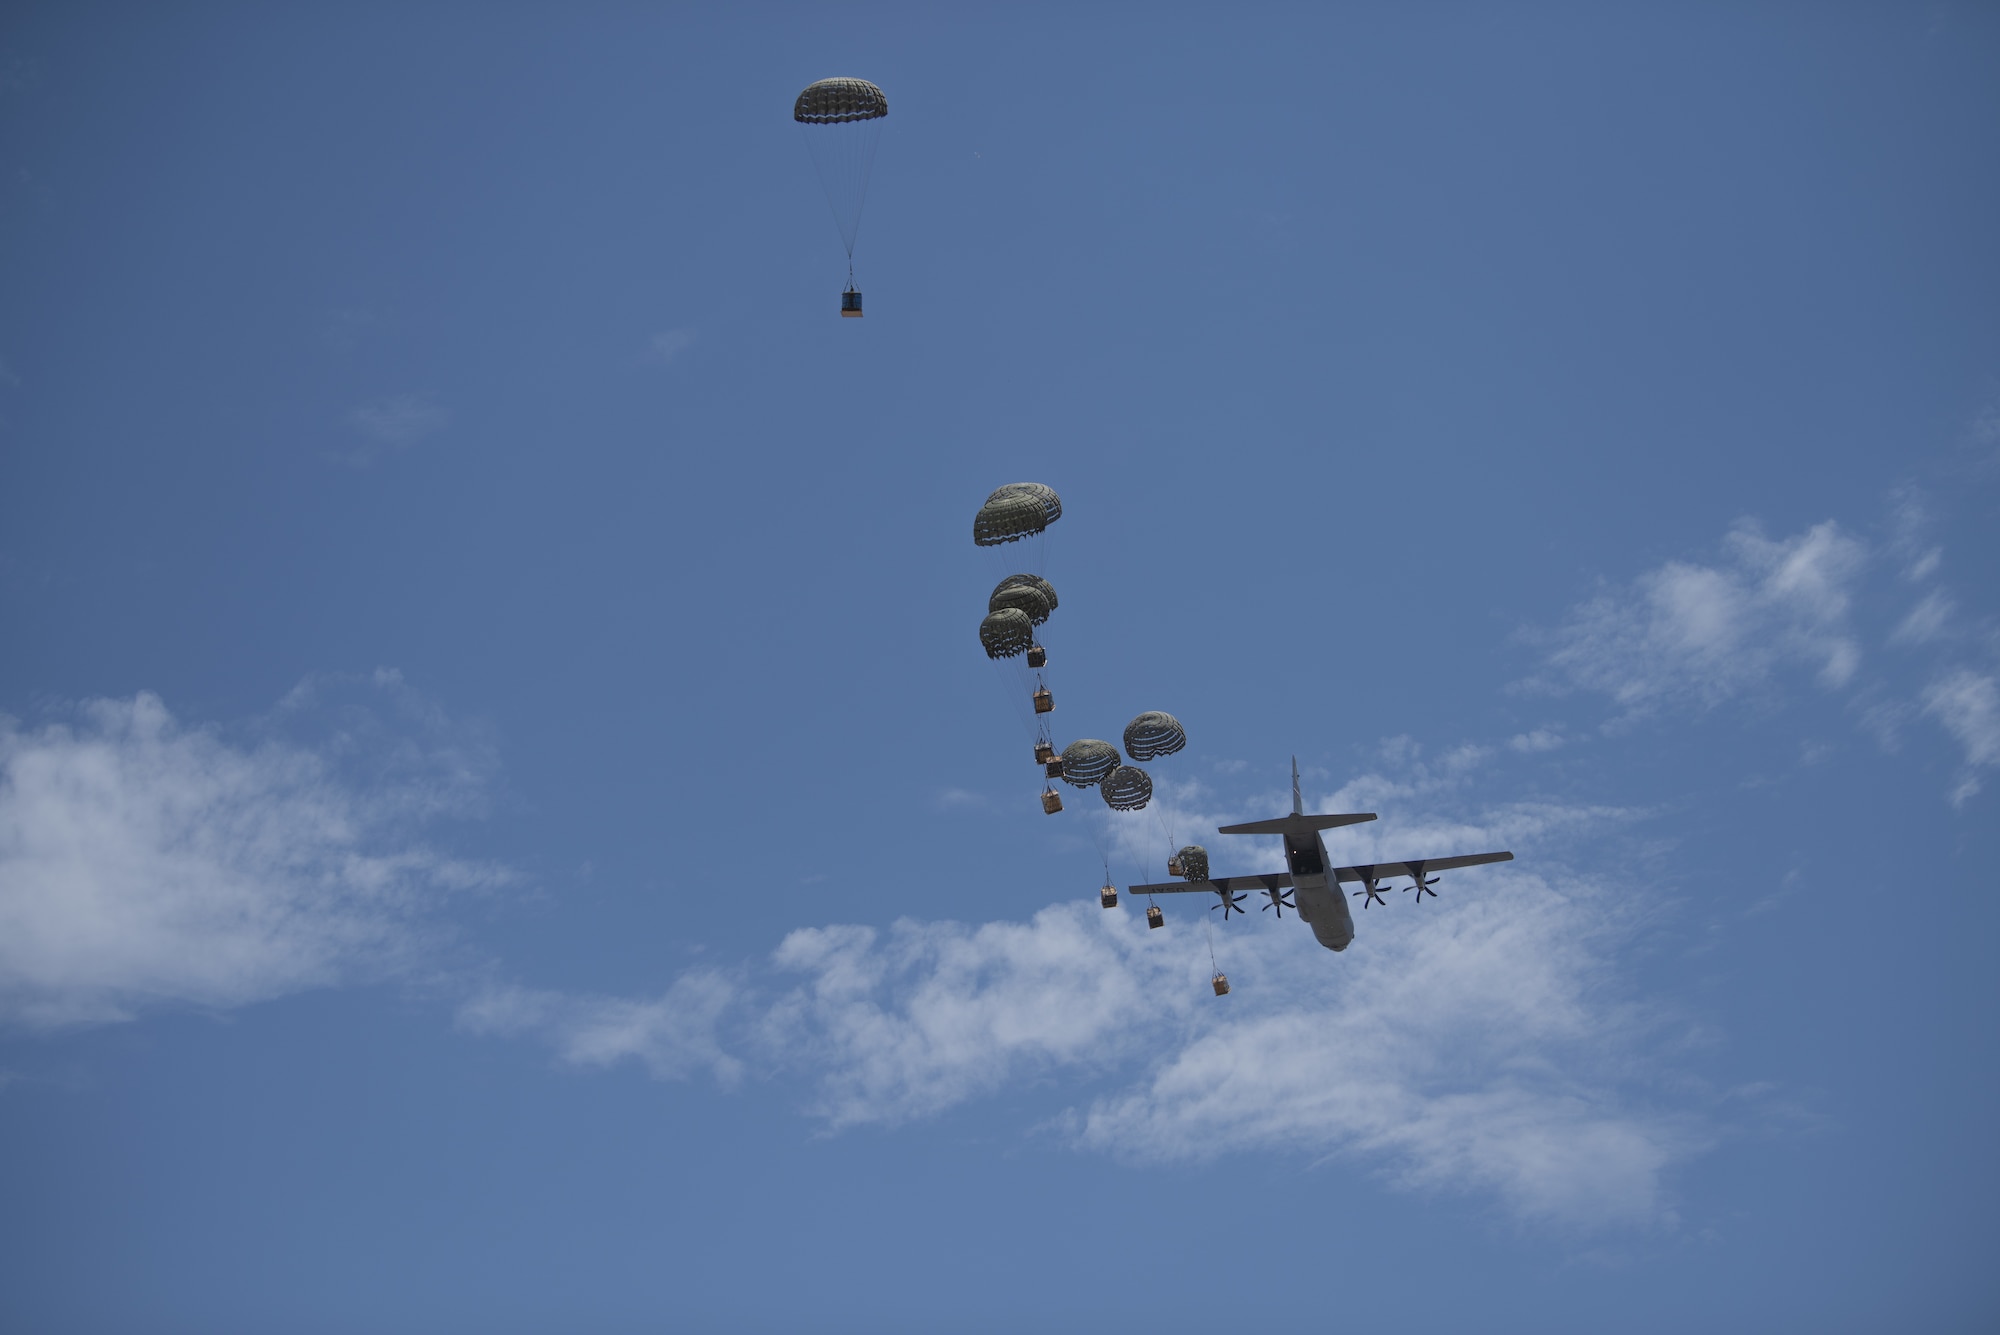 Containerized Delivery System Bundles are dropped from a C-130J Super Hercules aircraft during a Joint Forcible Entry exercise at Dyess Air Force Base, Texas, July 14, 2020.